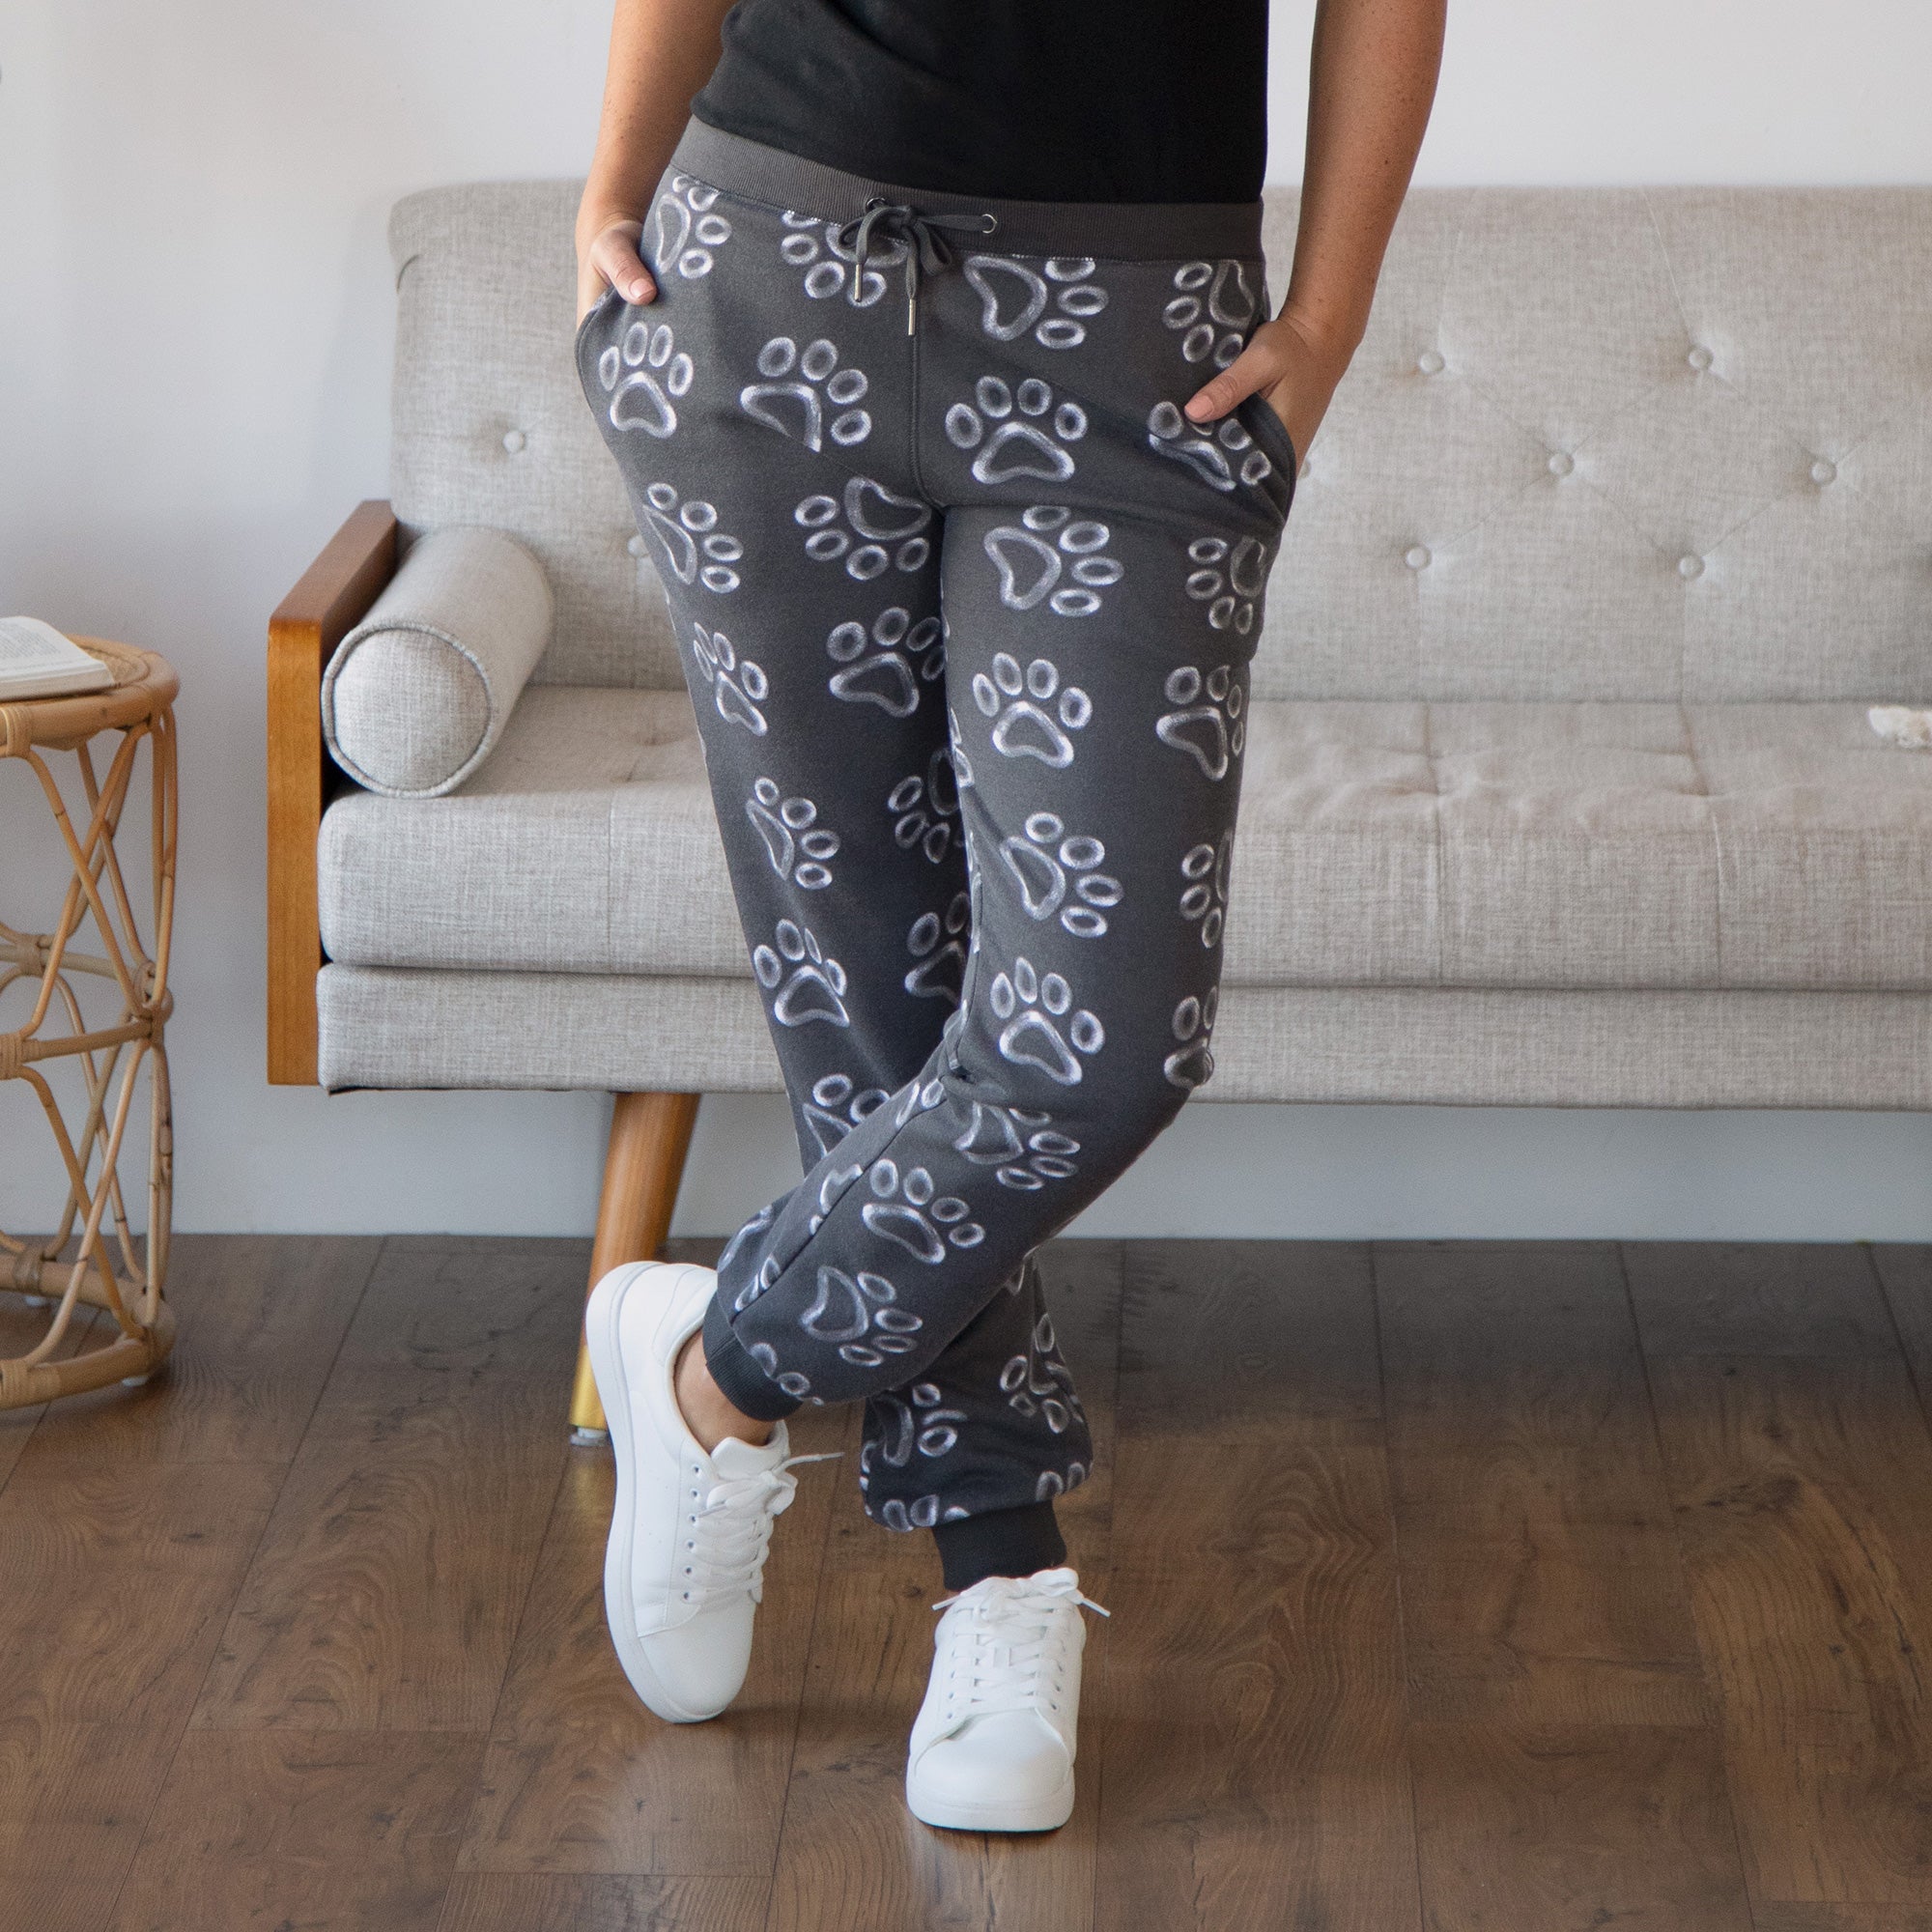 All Over Chalk Paw Sweatpants - S